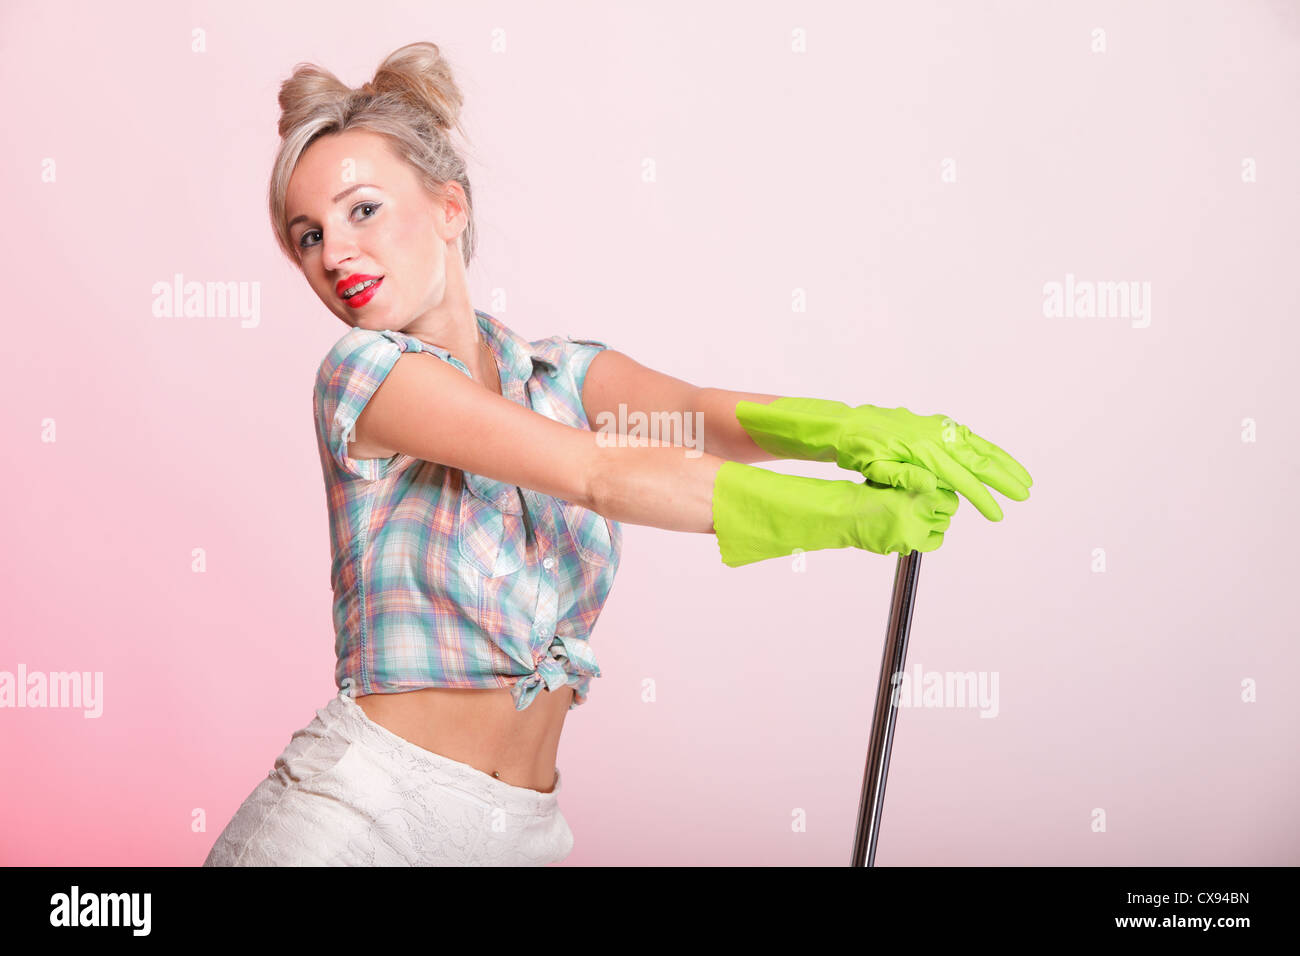 Cheerful pin up girl portrait style rétro femme pinup housewife cleaner mop sur fond rose Banque D'Images